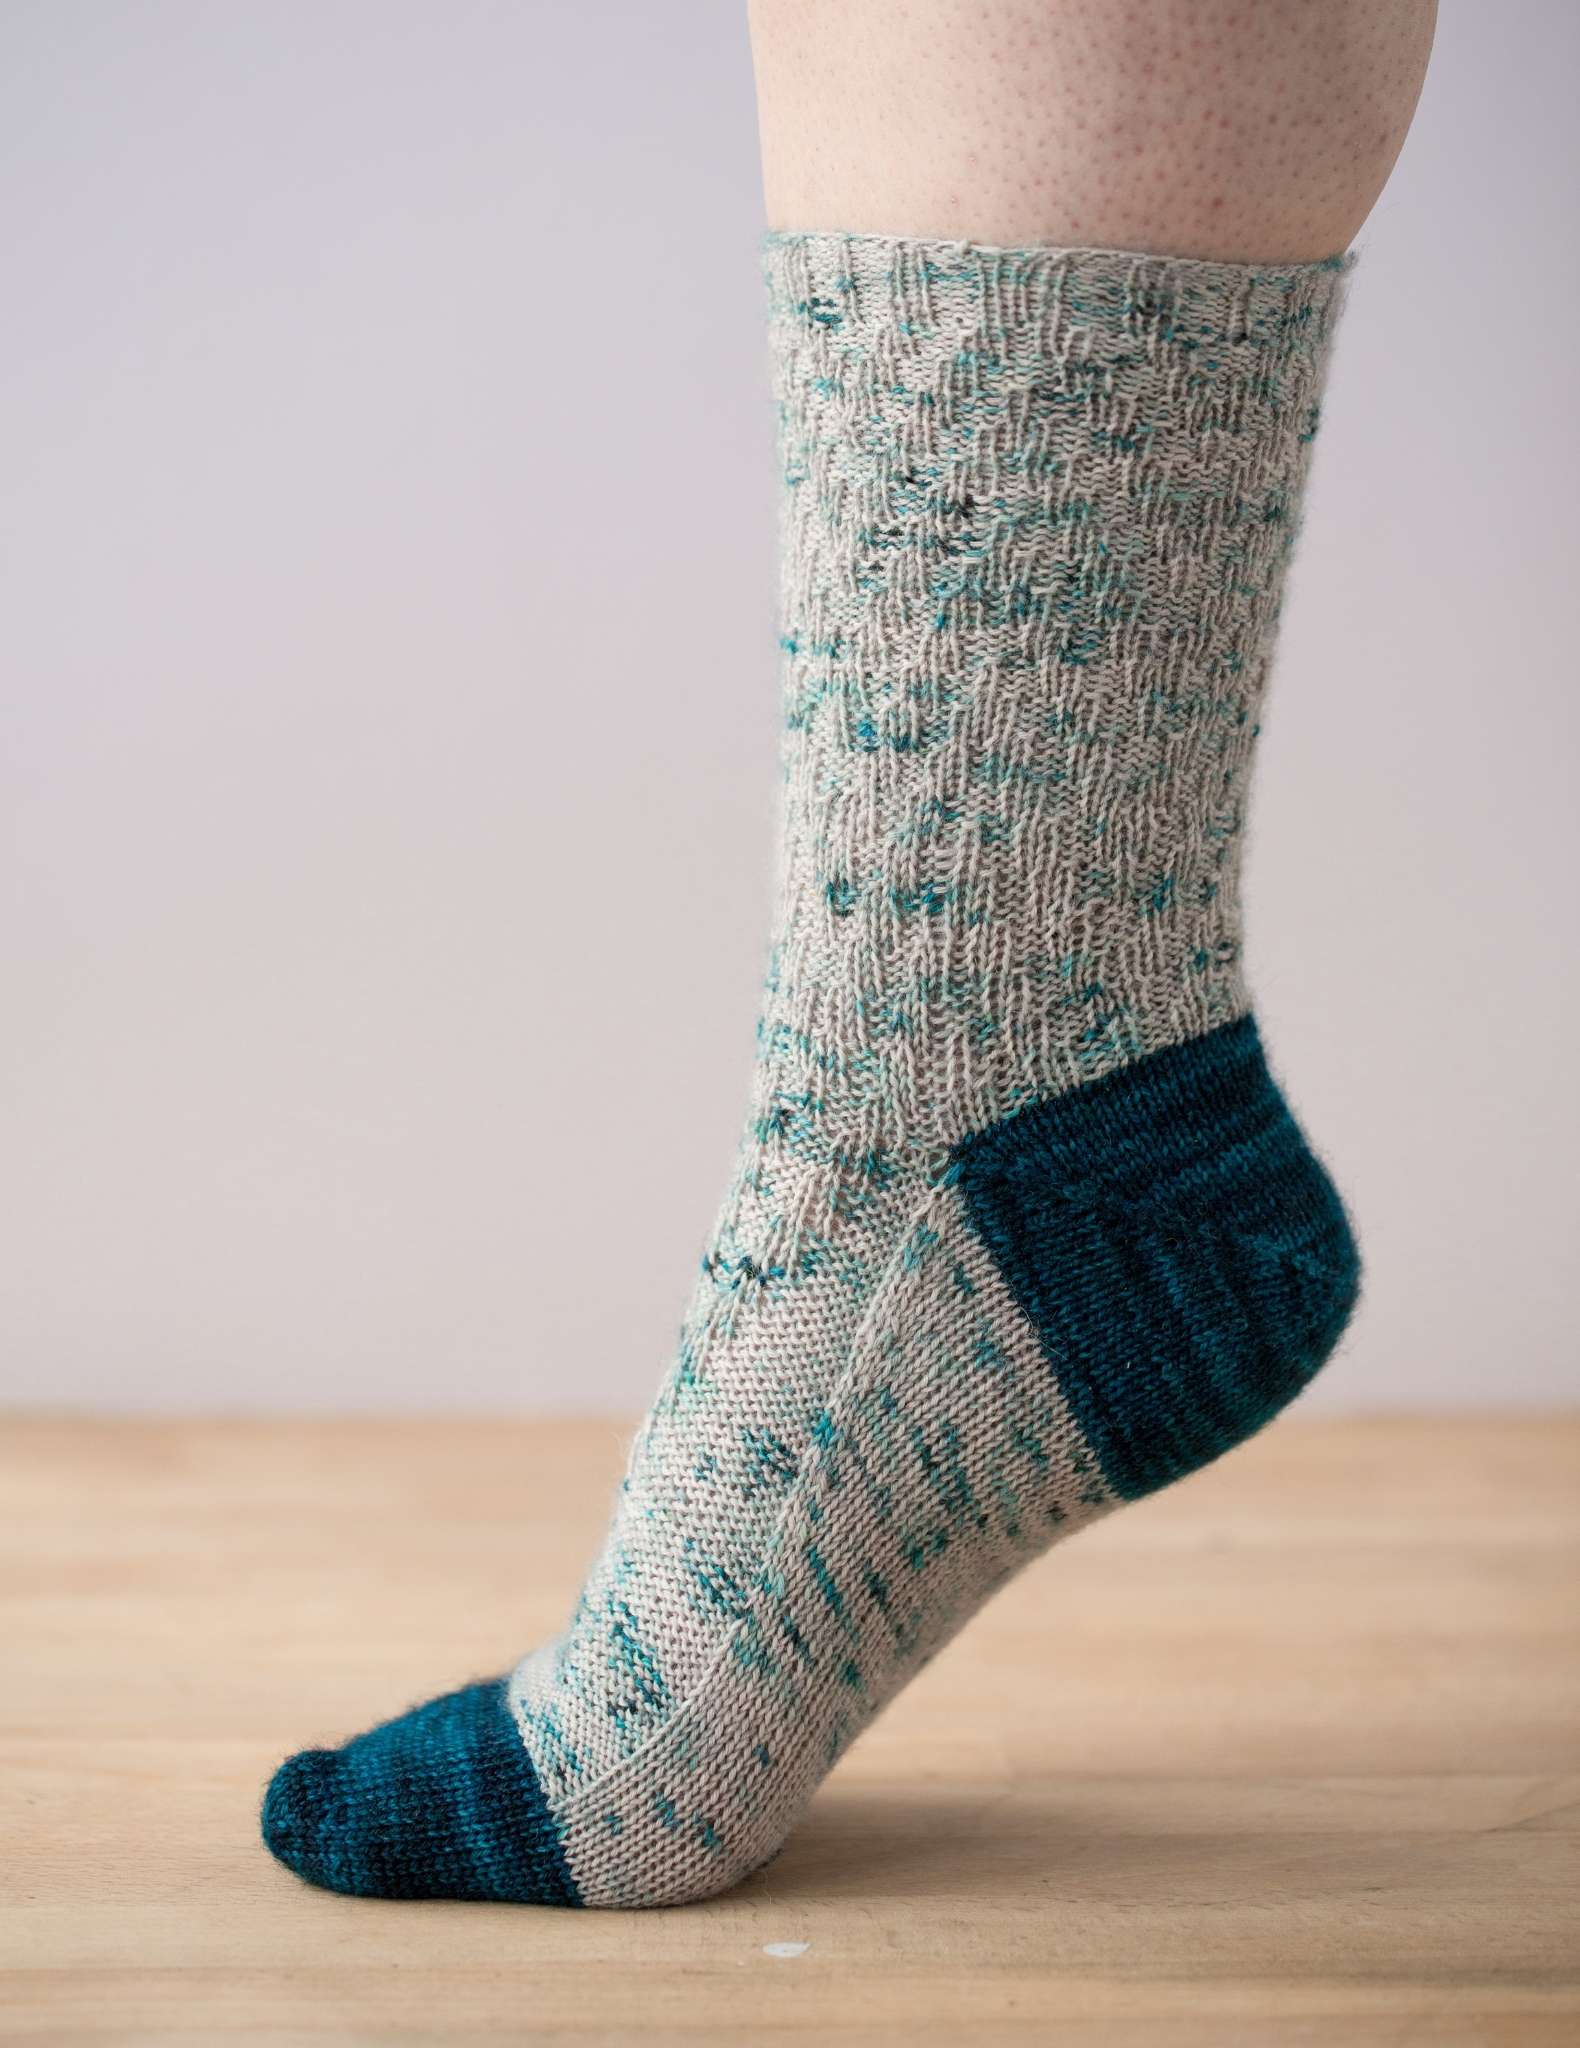 one foot is photographed from the side, with the toe on a wooden surface and the heel raised. The sock has a dark teal toe and heel and a paler textured pattern on the rest of the sock.